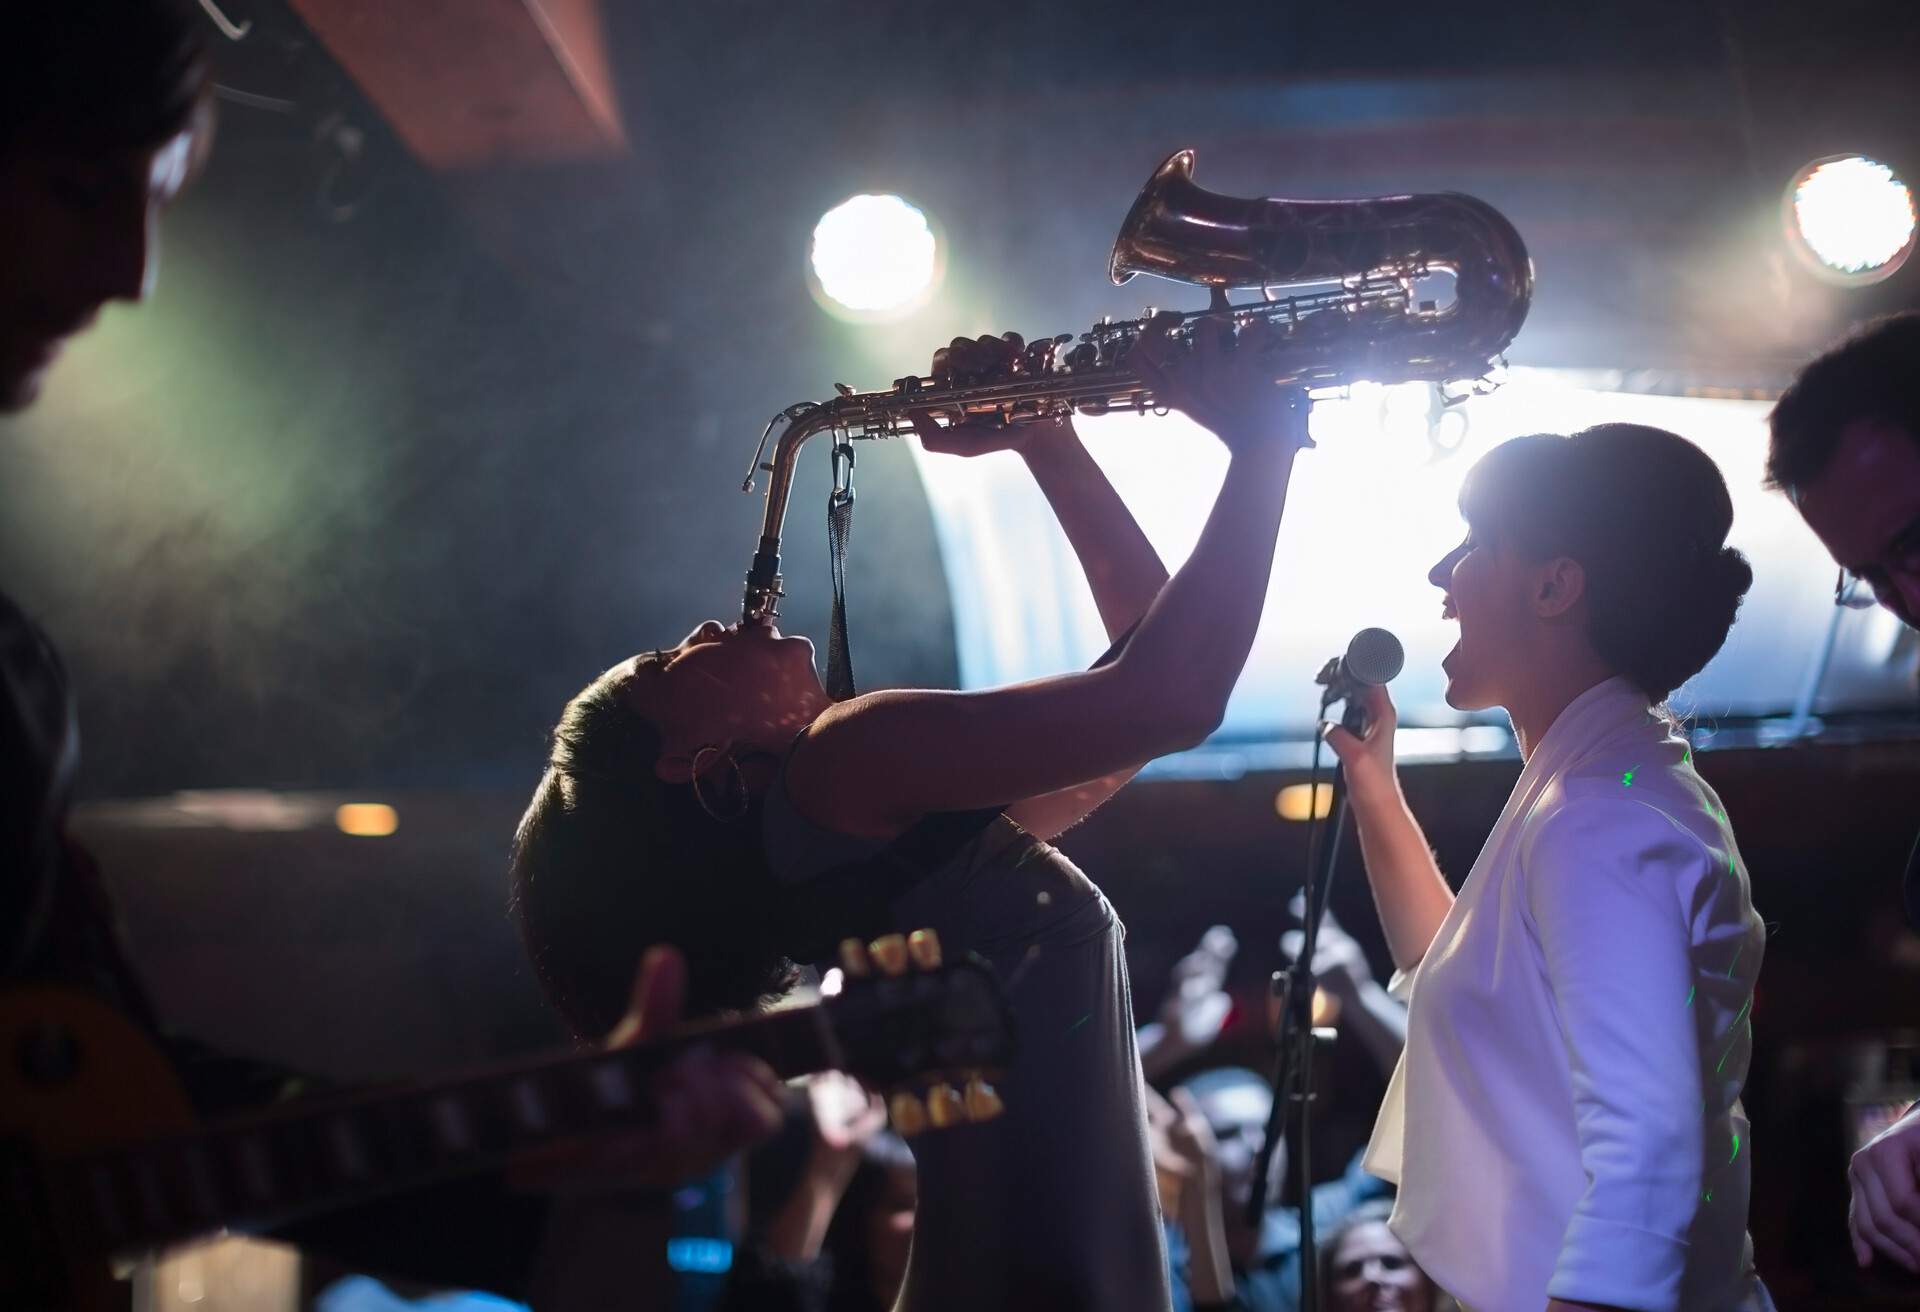 A person sings into a microphone while a musician plays a saxophone while bending backwards.